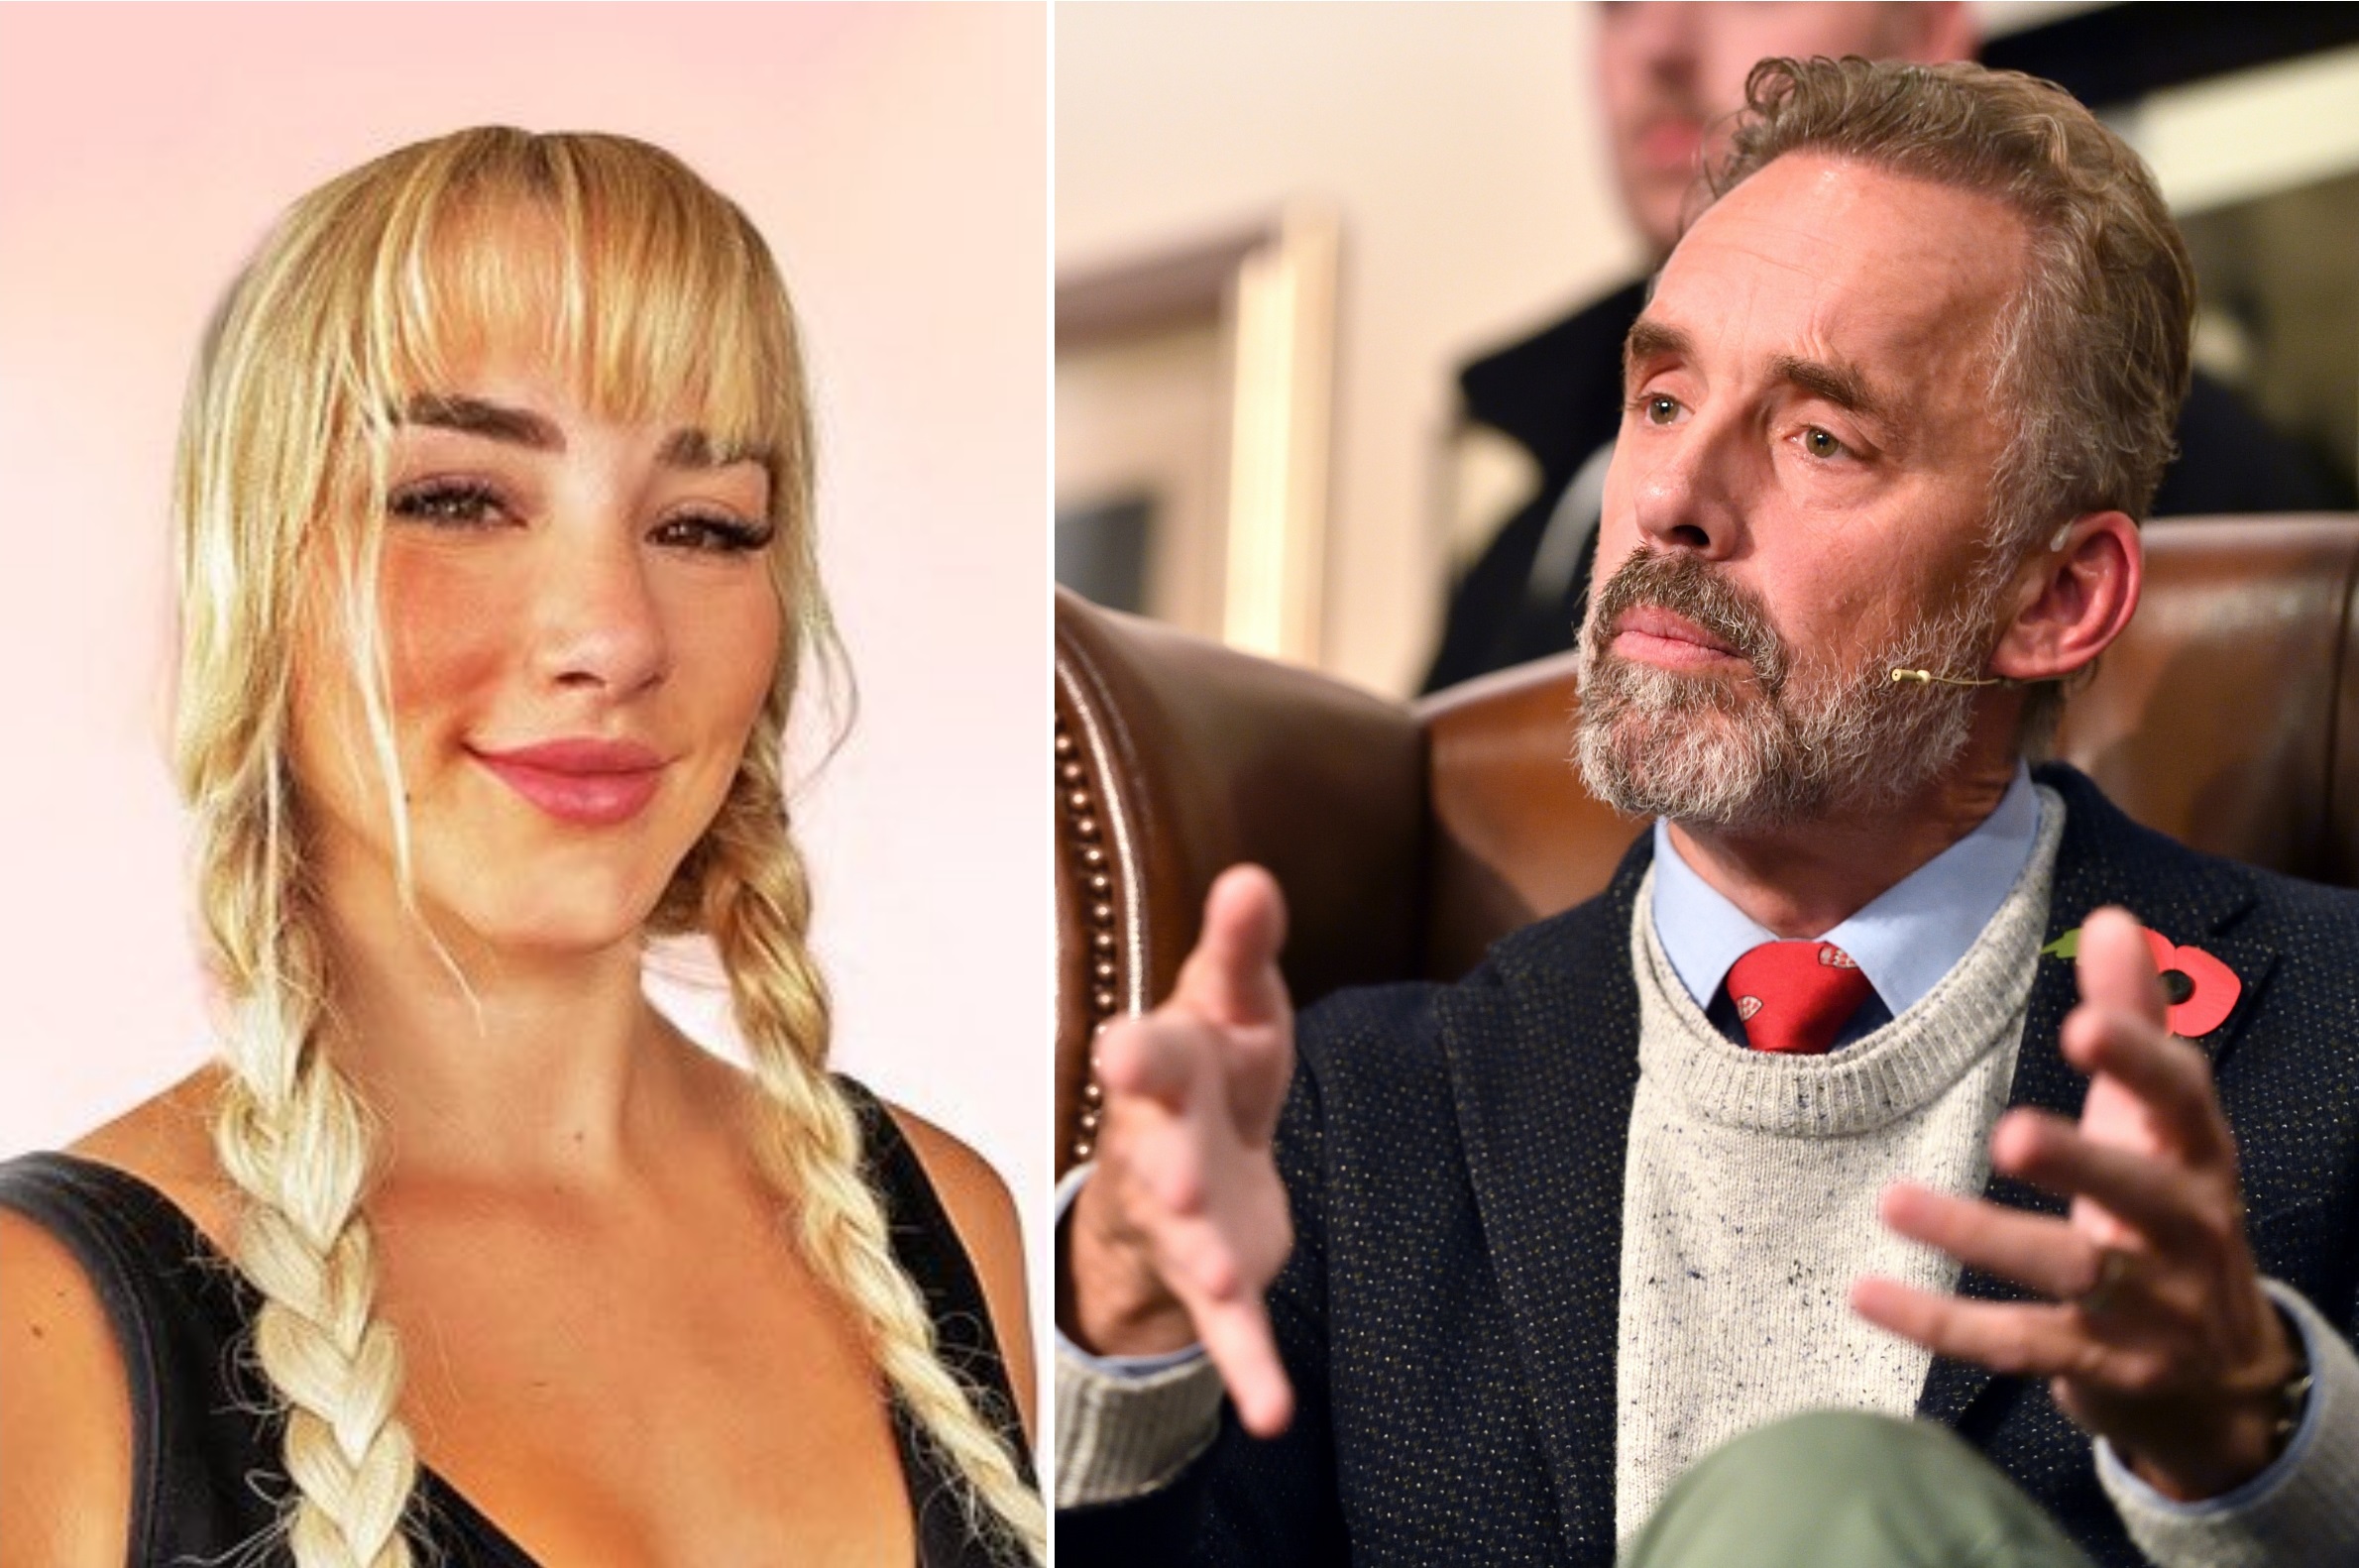 pop Good feeling Absolutely Jordan Peterson's Daughter Proves His Popularity Increased After Suspension